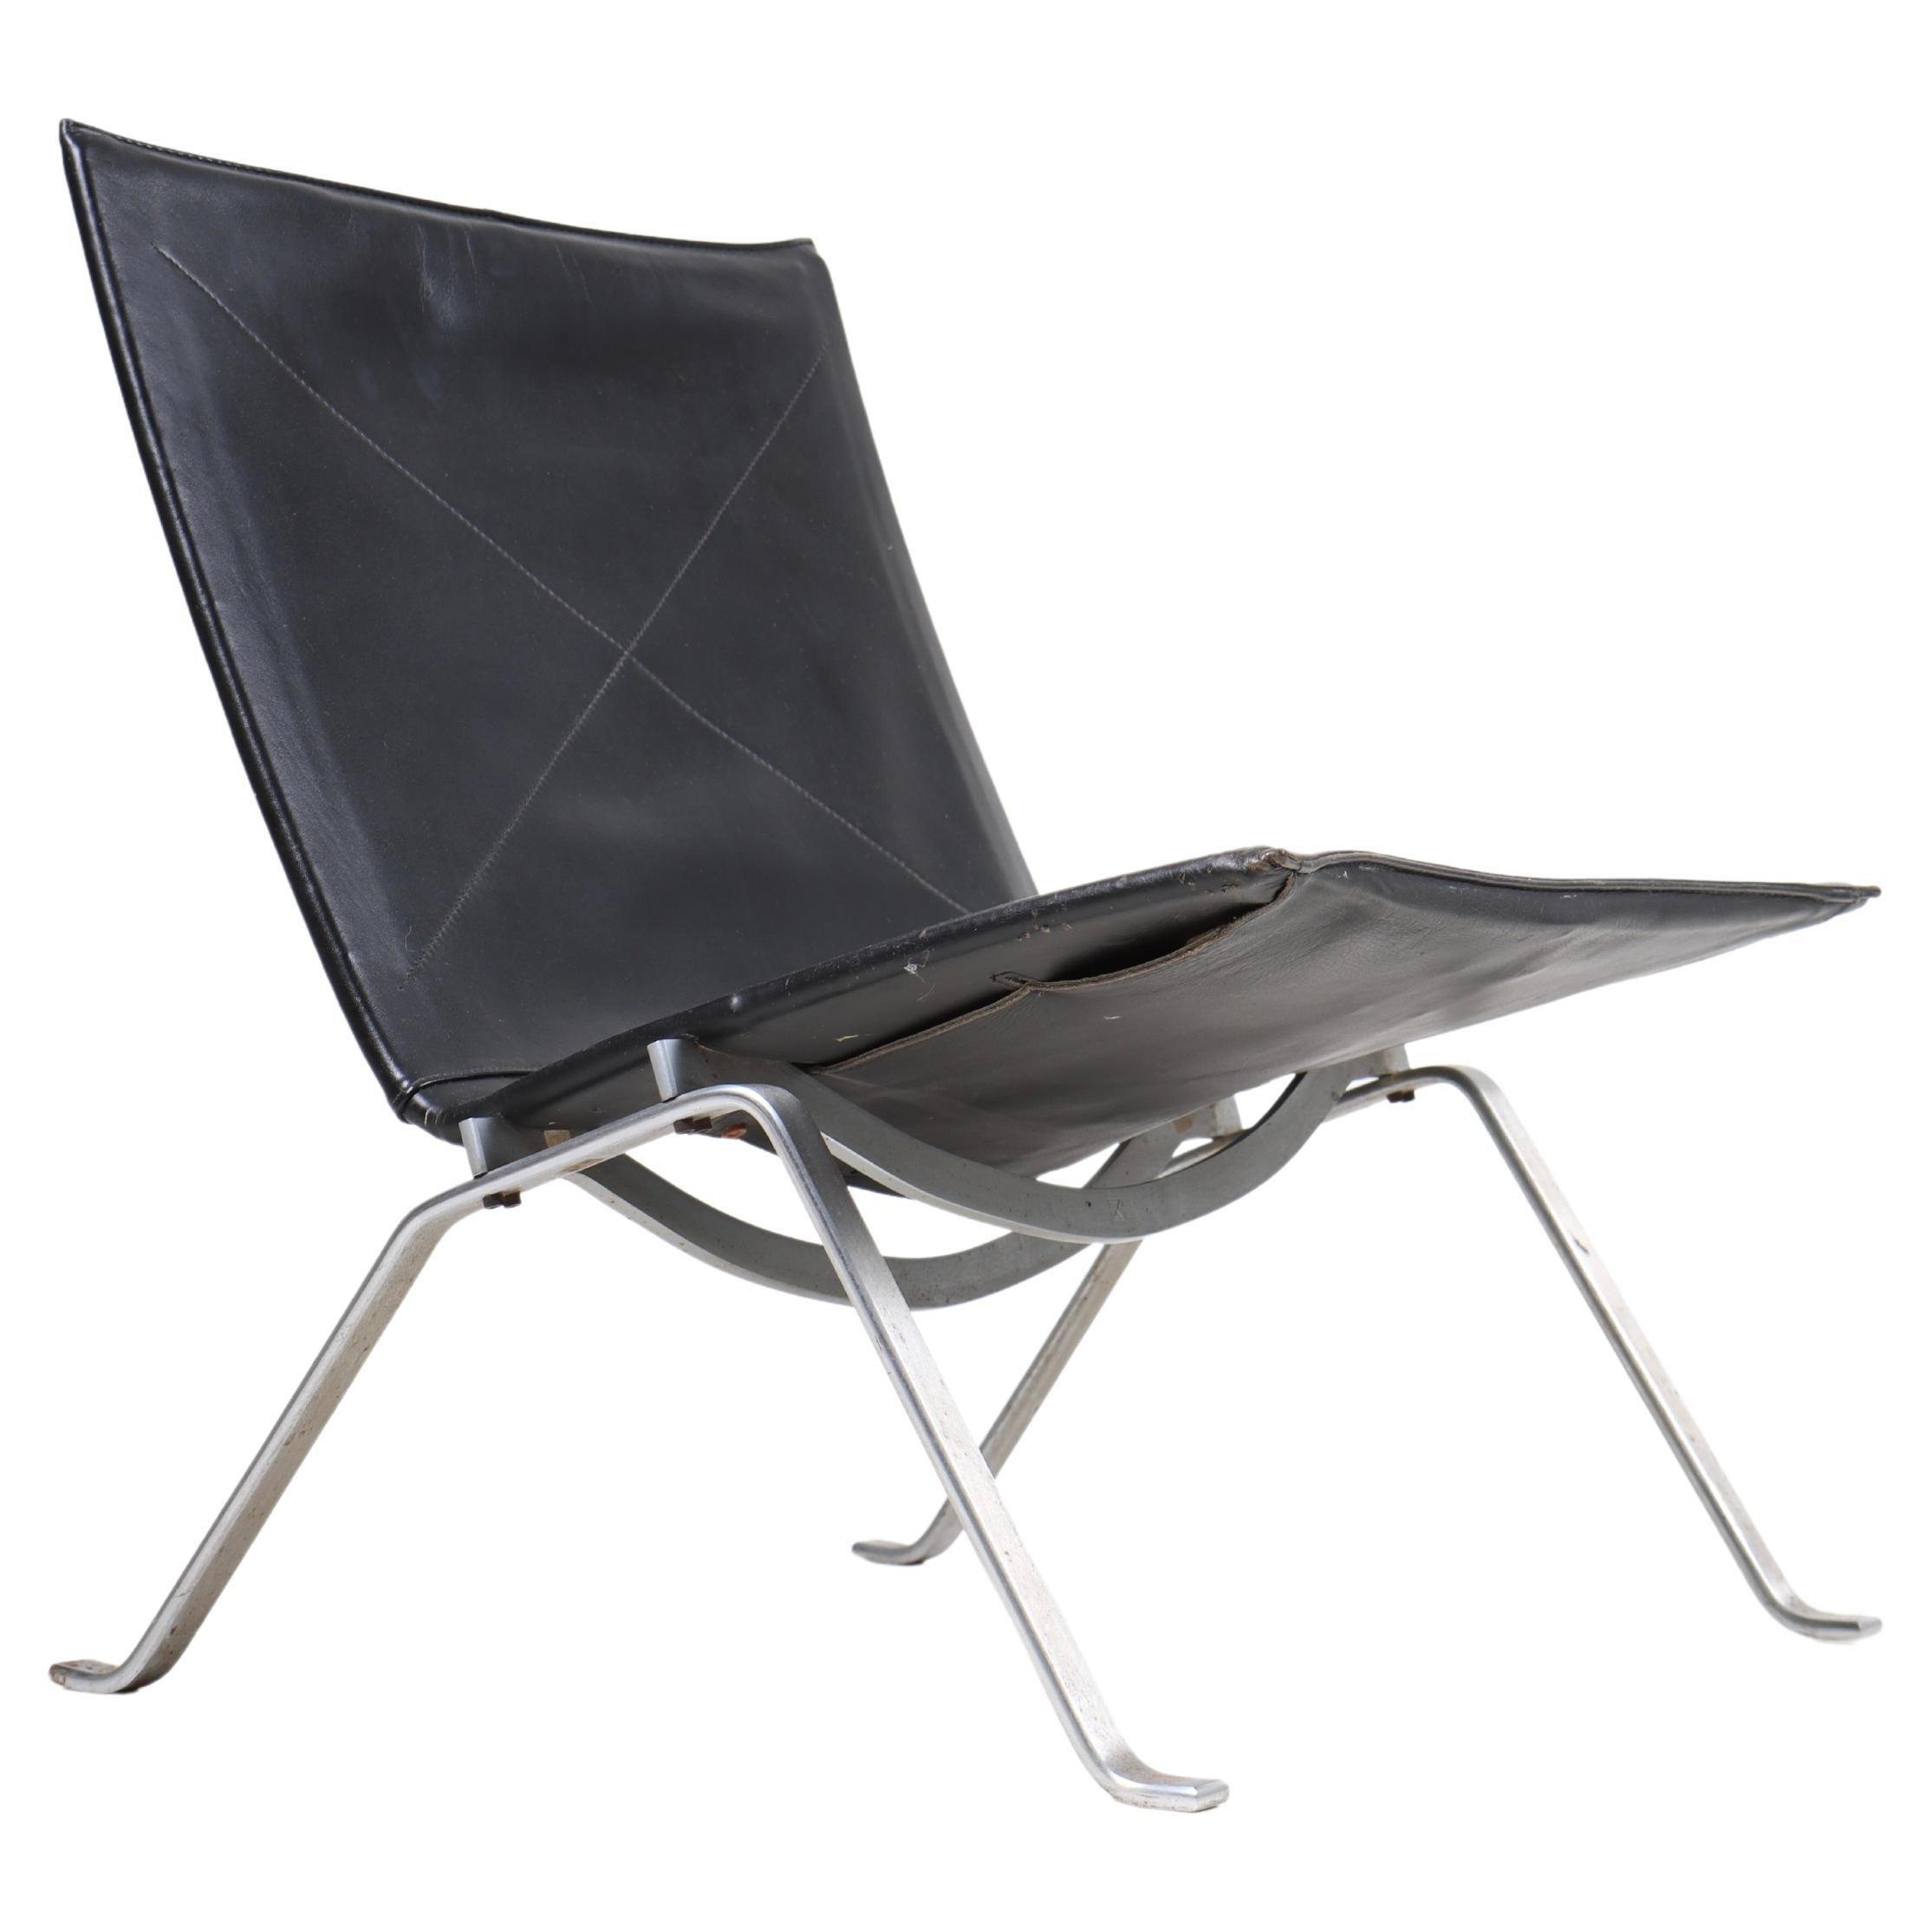 Midcentury "PK 22" Lounge Chair in Patinated Leather Designed by Poul Kjærholm